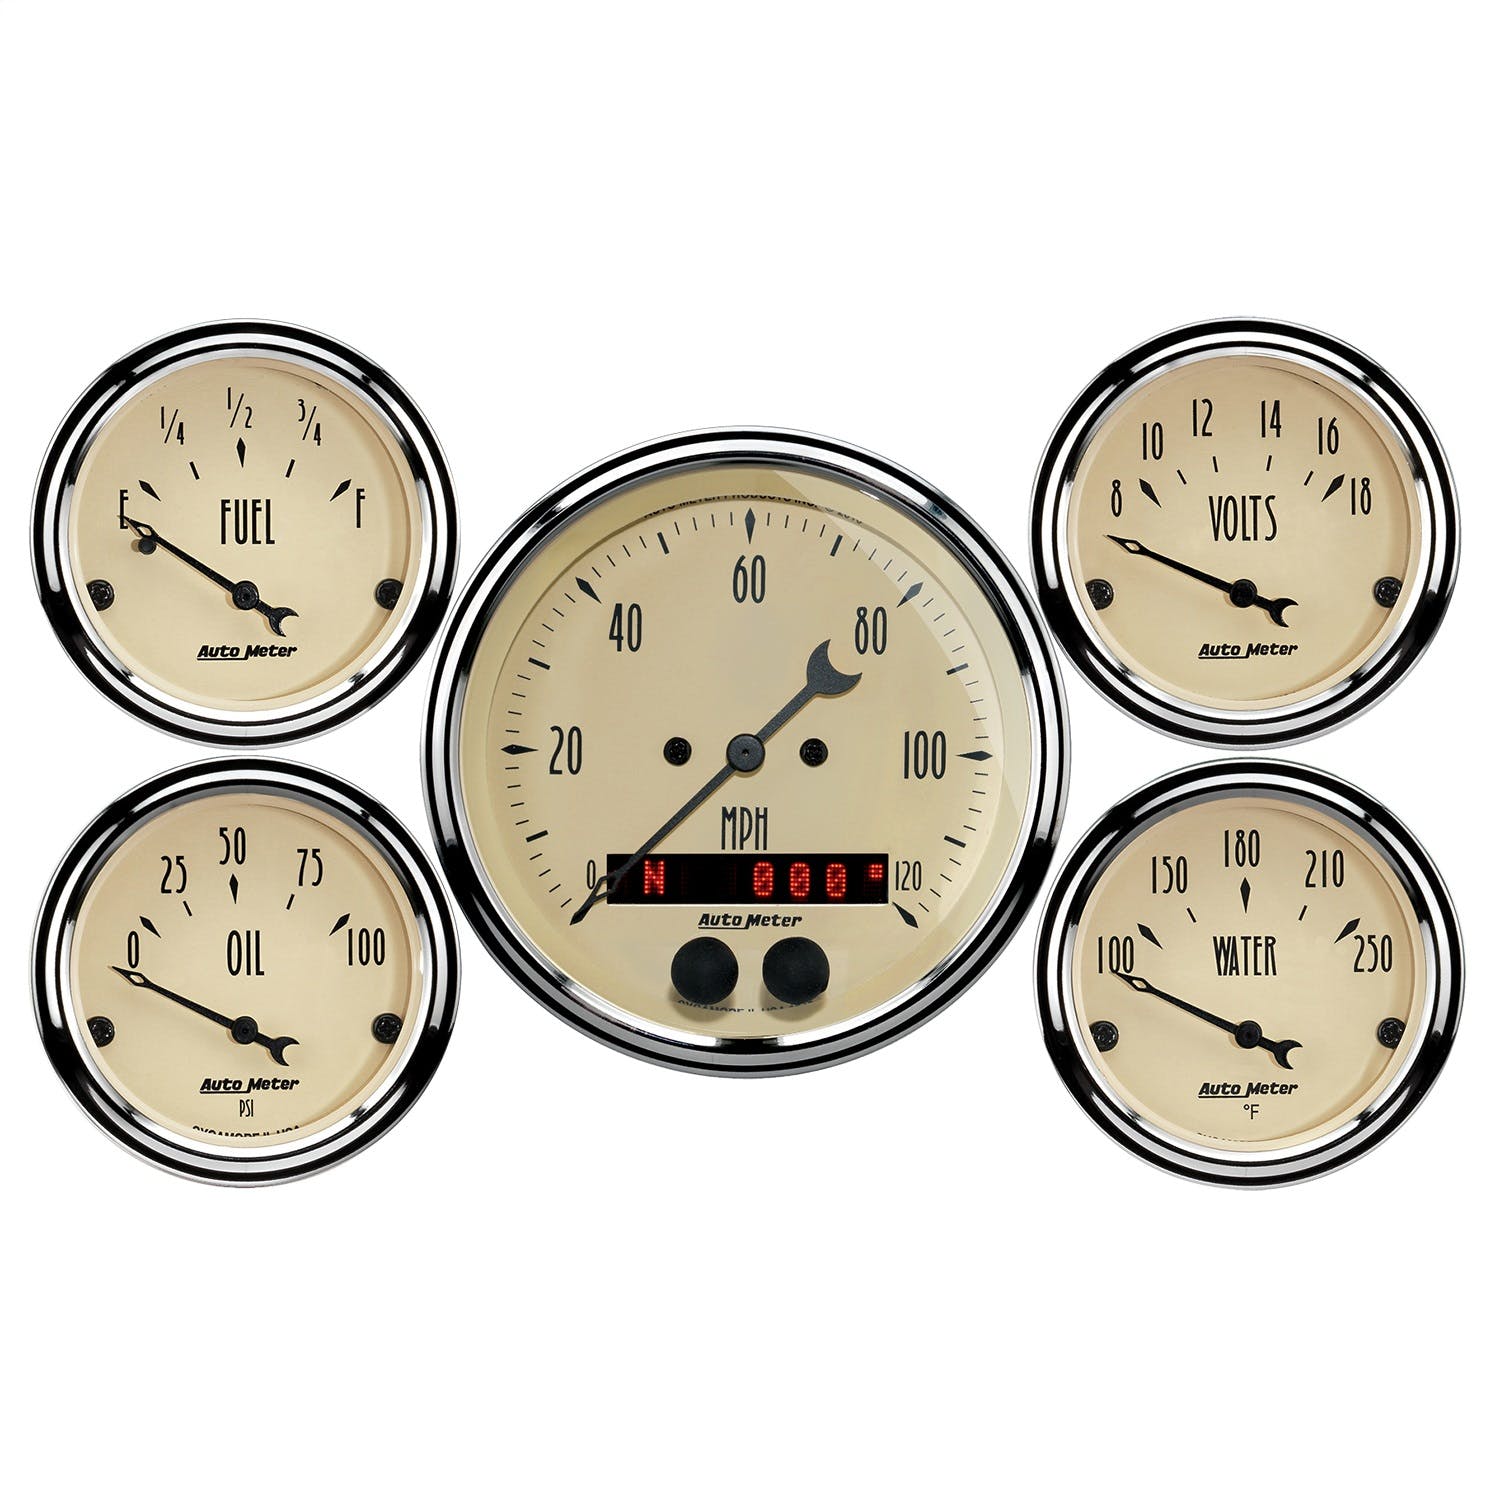 AutoMeter Products 1850 GPS Speedometer Antique Beige 5 PC Kit